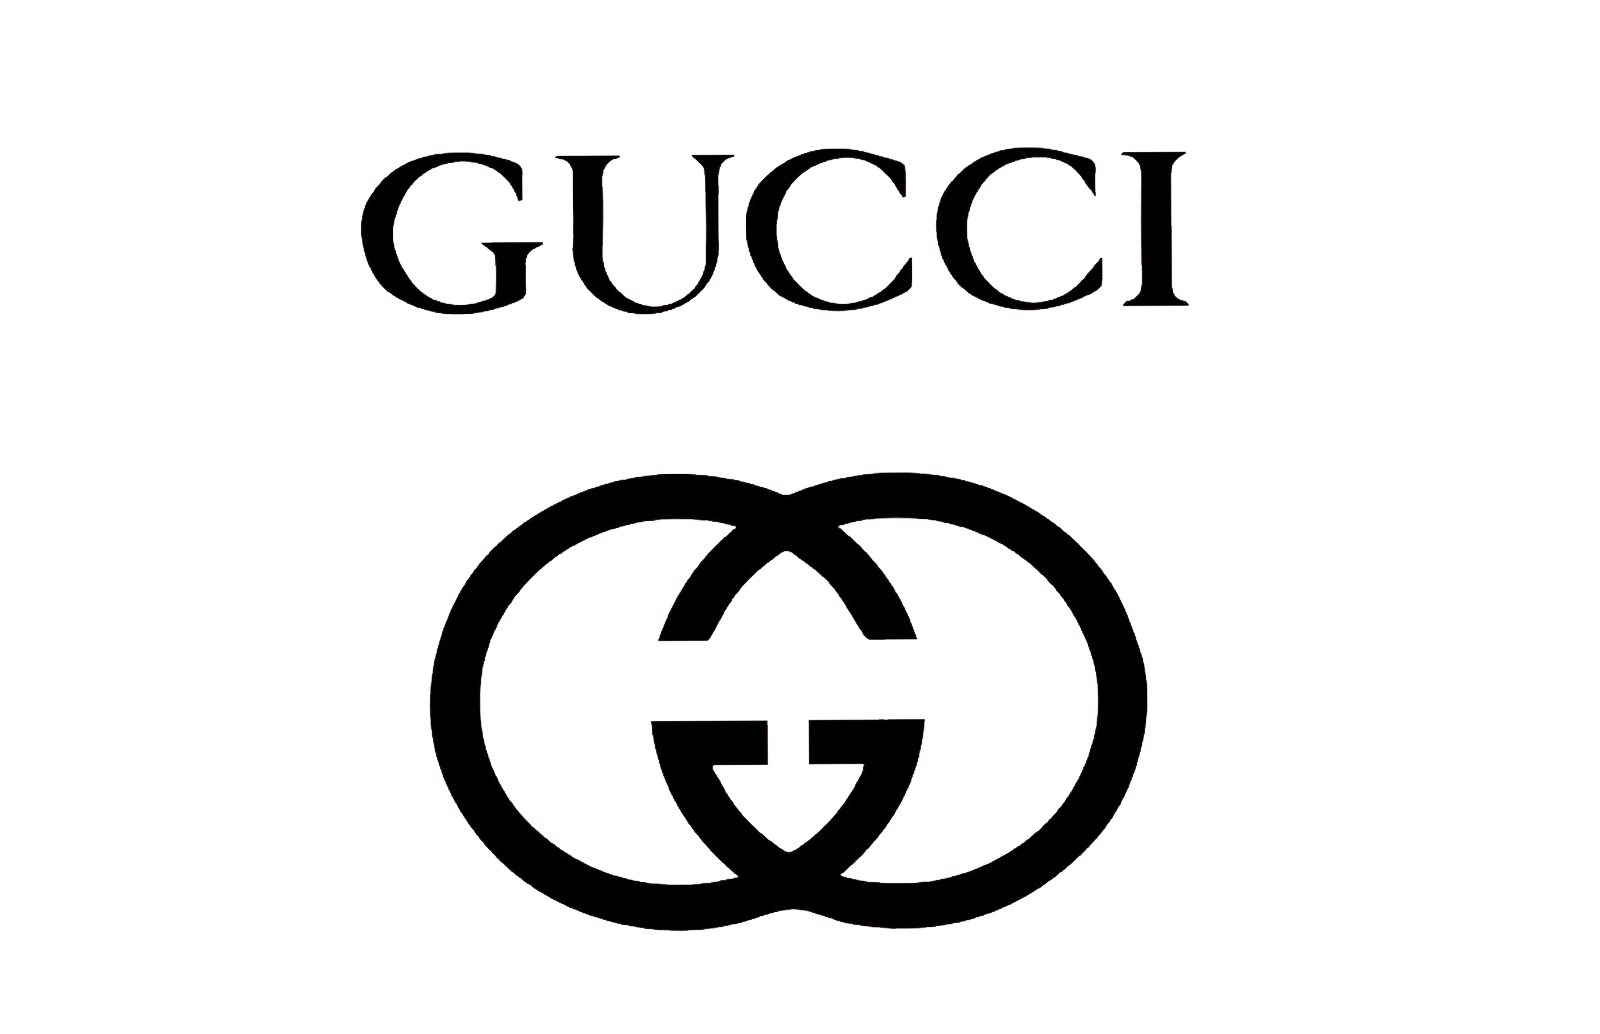 Gucci Logo transparent background PNG cliparts free download